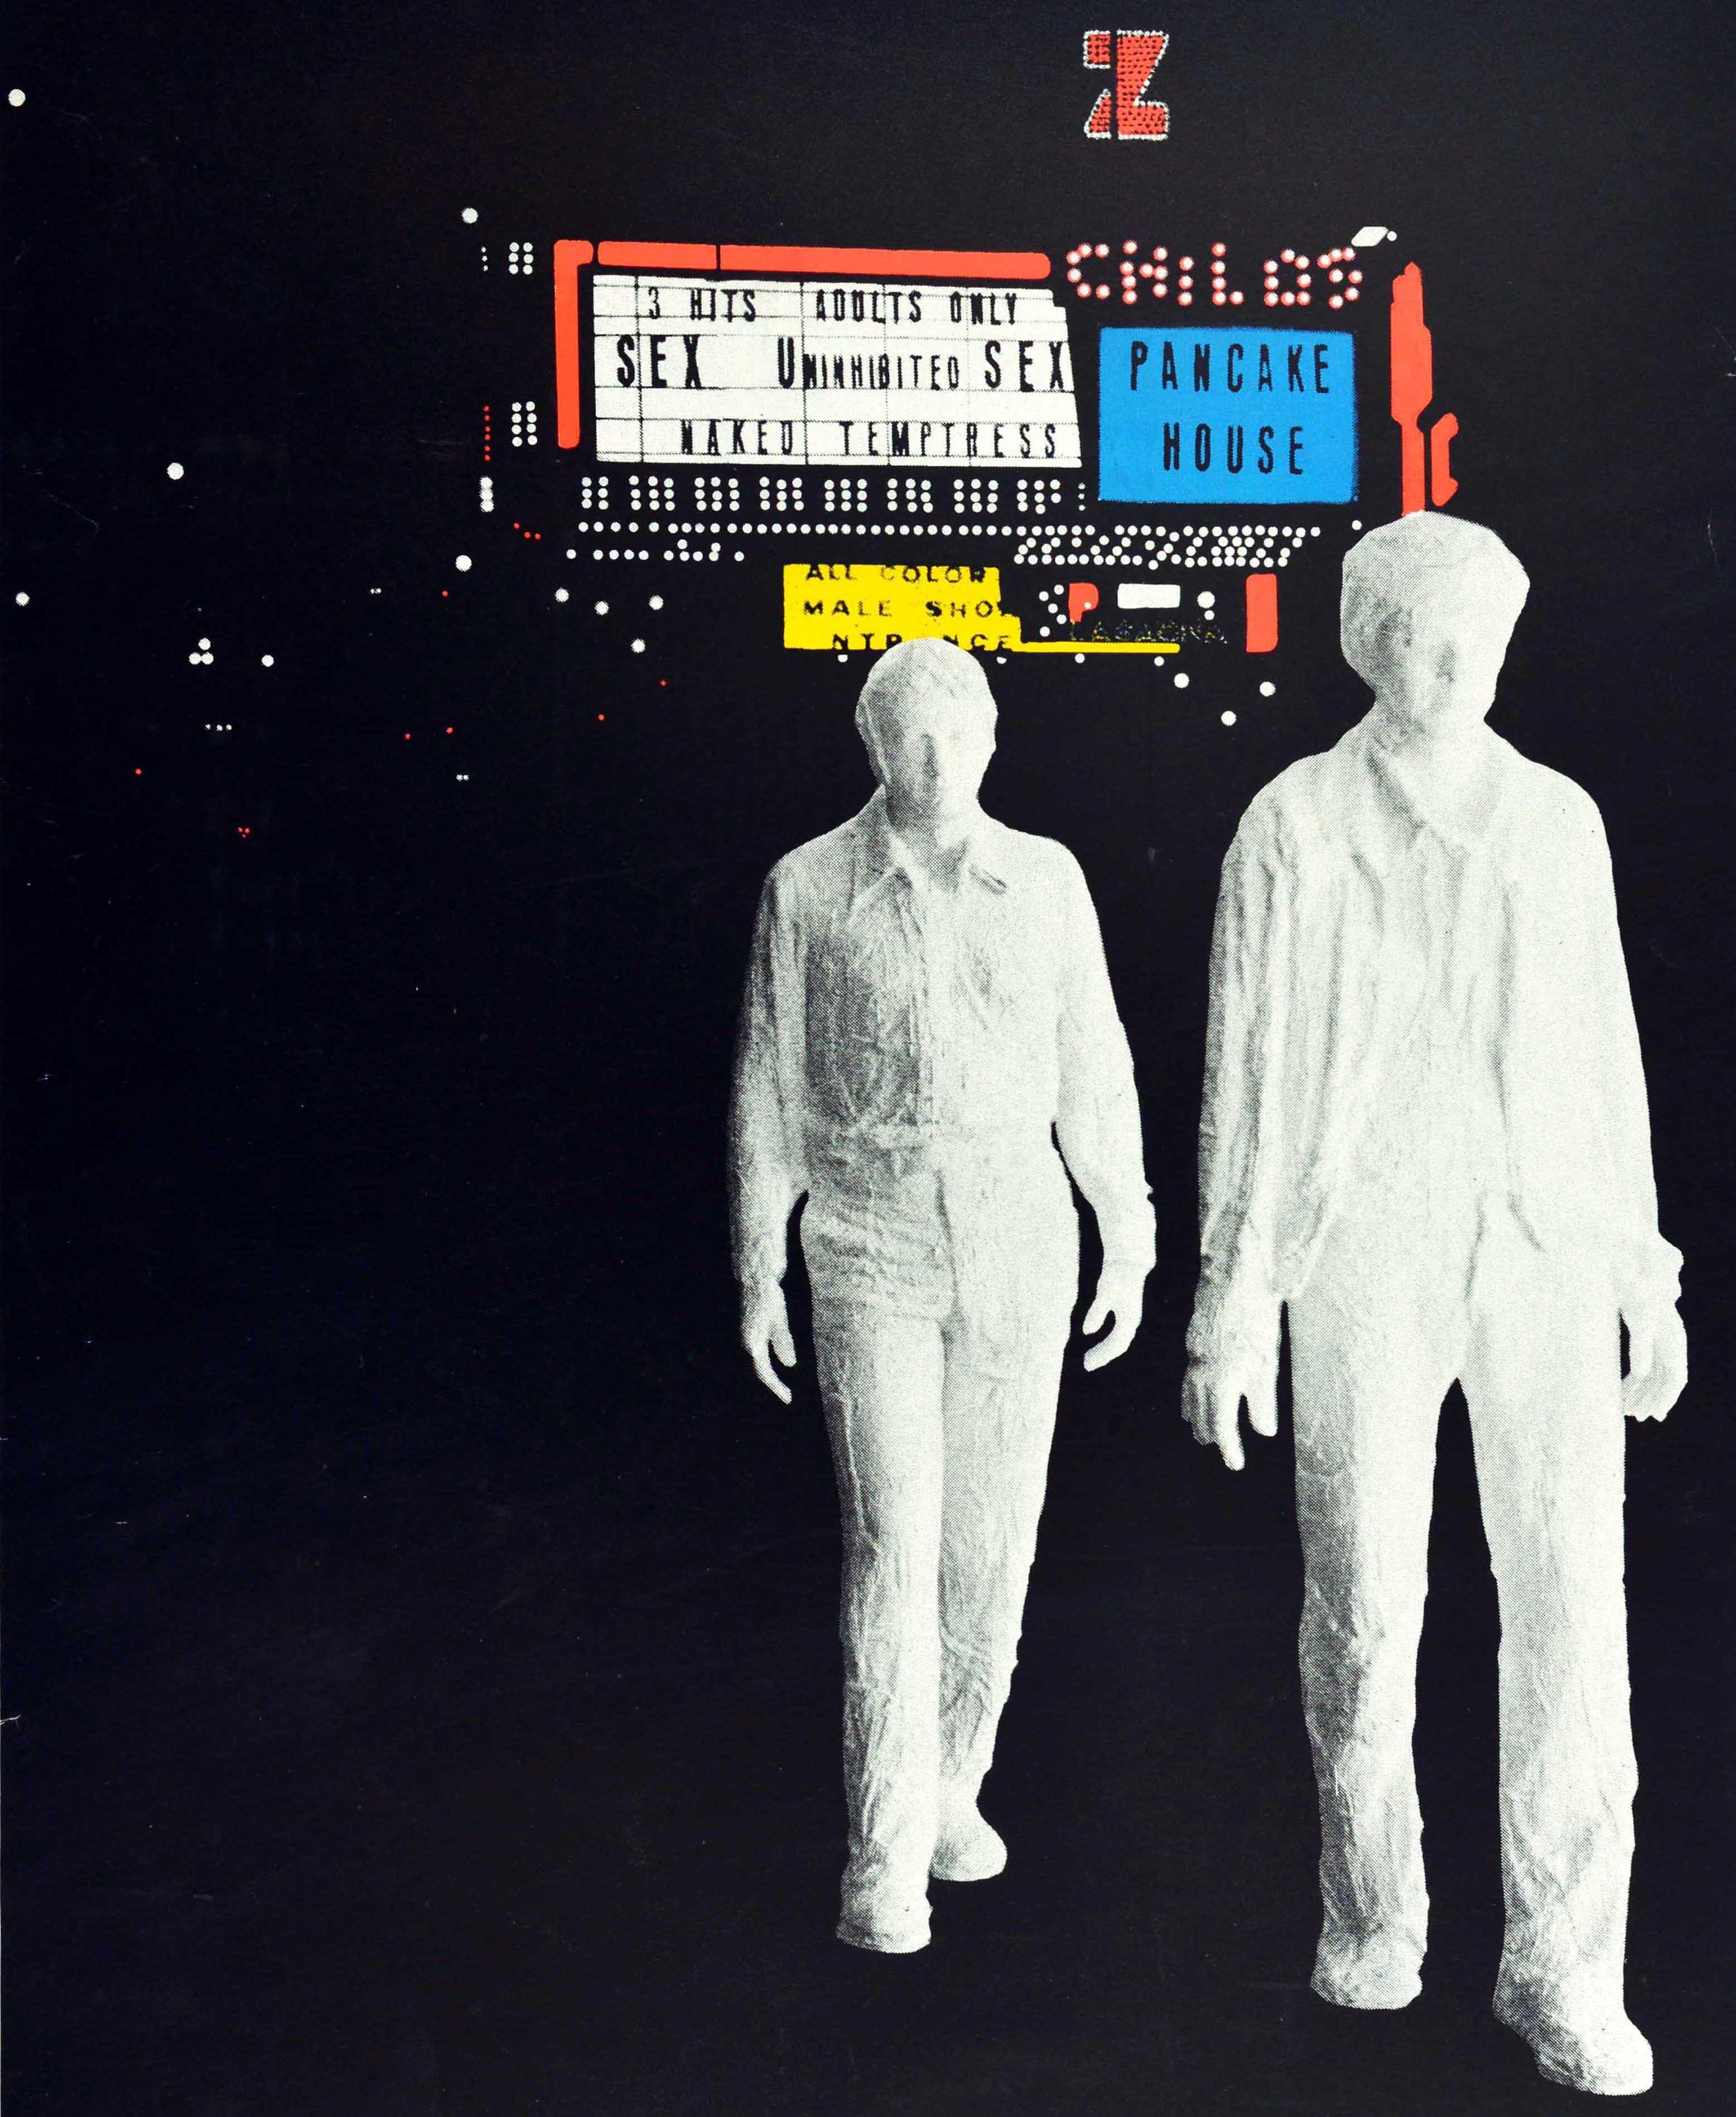 Original vintage advertising poster for a George Segal sculpture exhibition held at the Stadt Galerie at the Lenbachhaus Art Museum in Munich from 17 November 1972 to 14 January 1973, featuring two life-sized figures of men in white walking on a